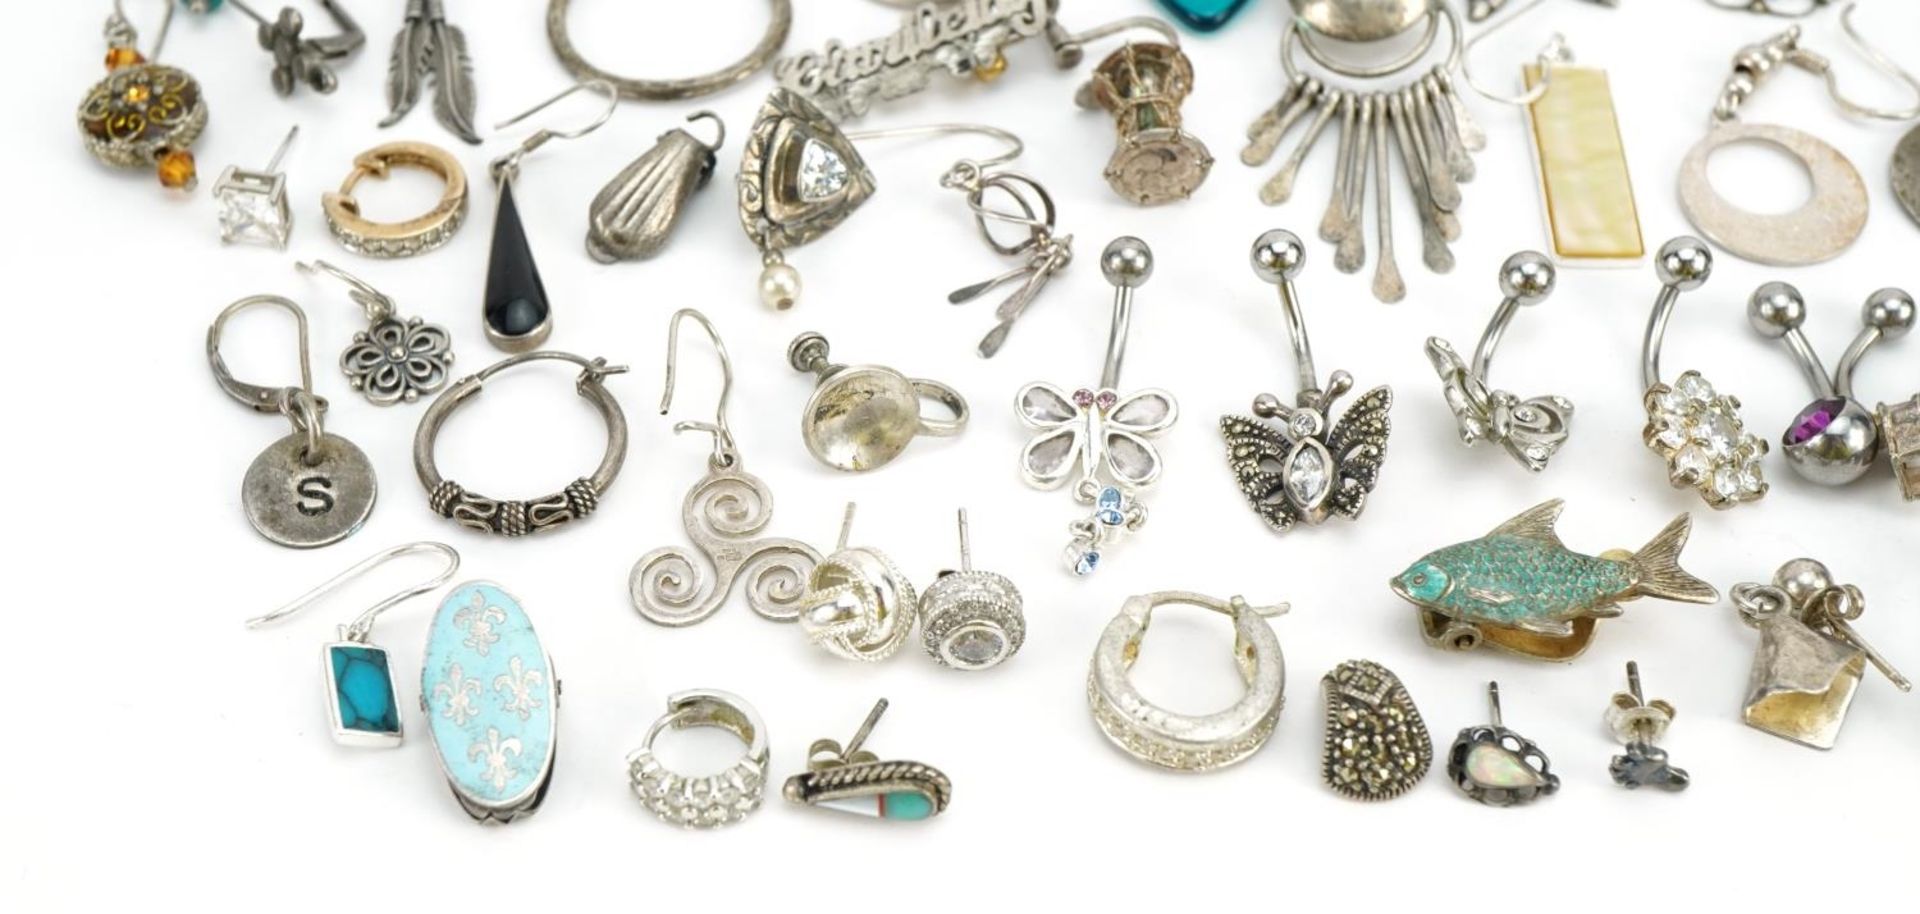 Vintage and later silver and white metal jewellery including earrings, pendants and blue enamel - Image 4 of 5